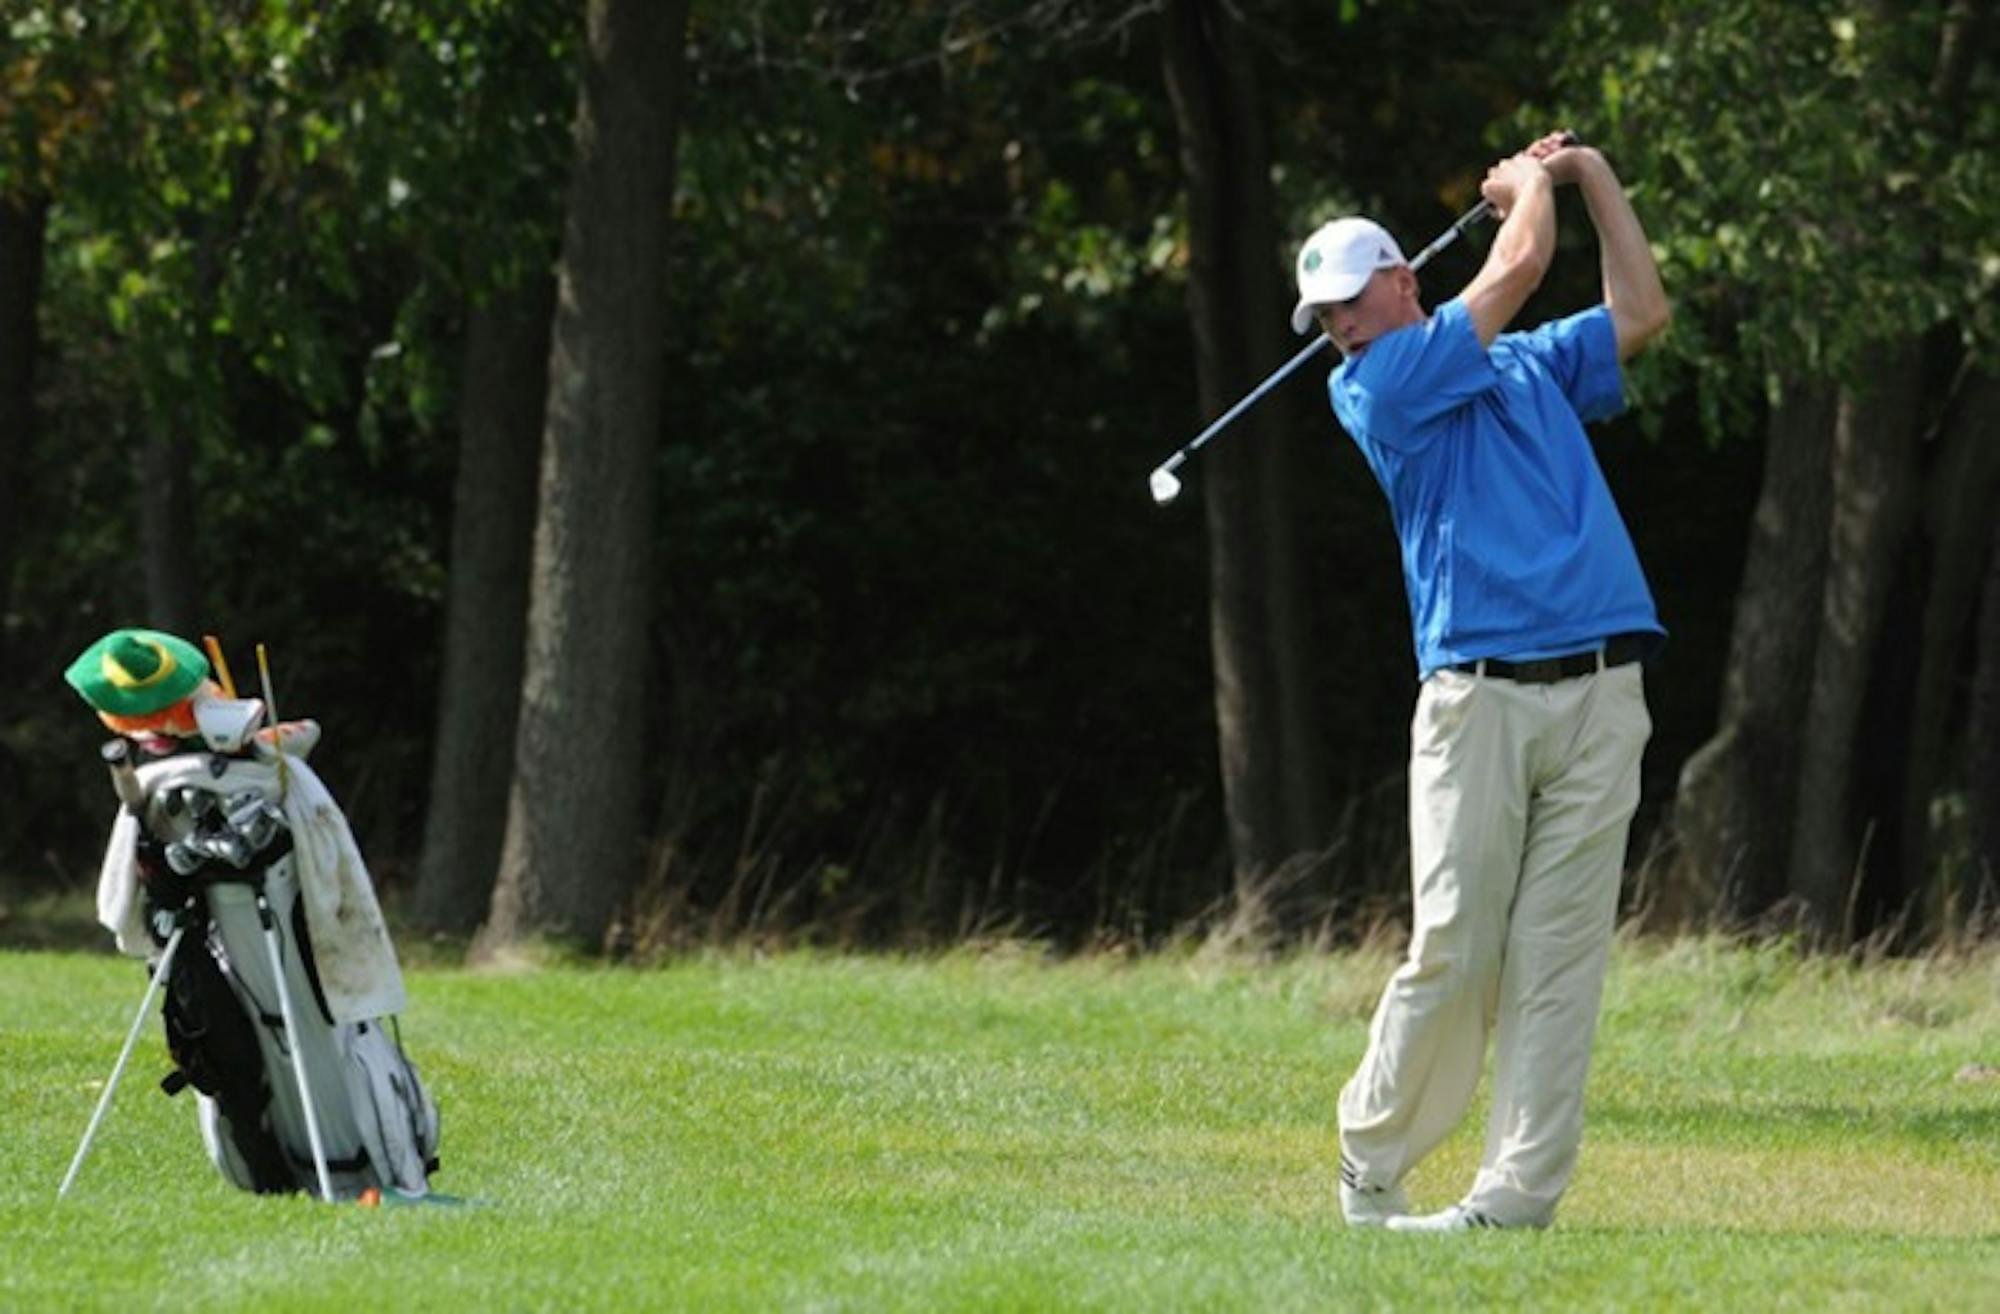 Junior Patrick Grahek tees off at the Fighting Irish Gridiron Golf Classic on Sept. 26, 2011 at the Warren Golf Course.